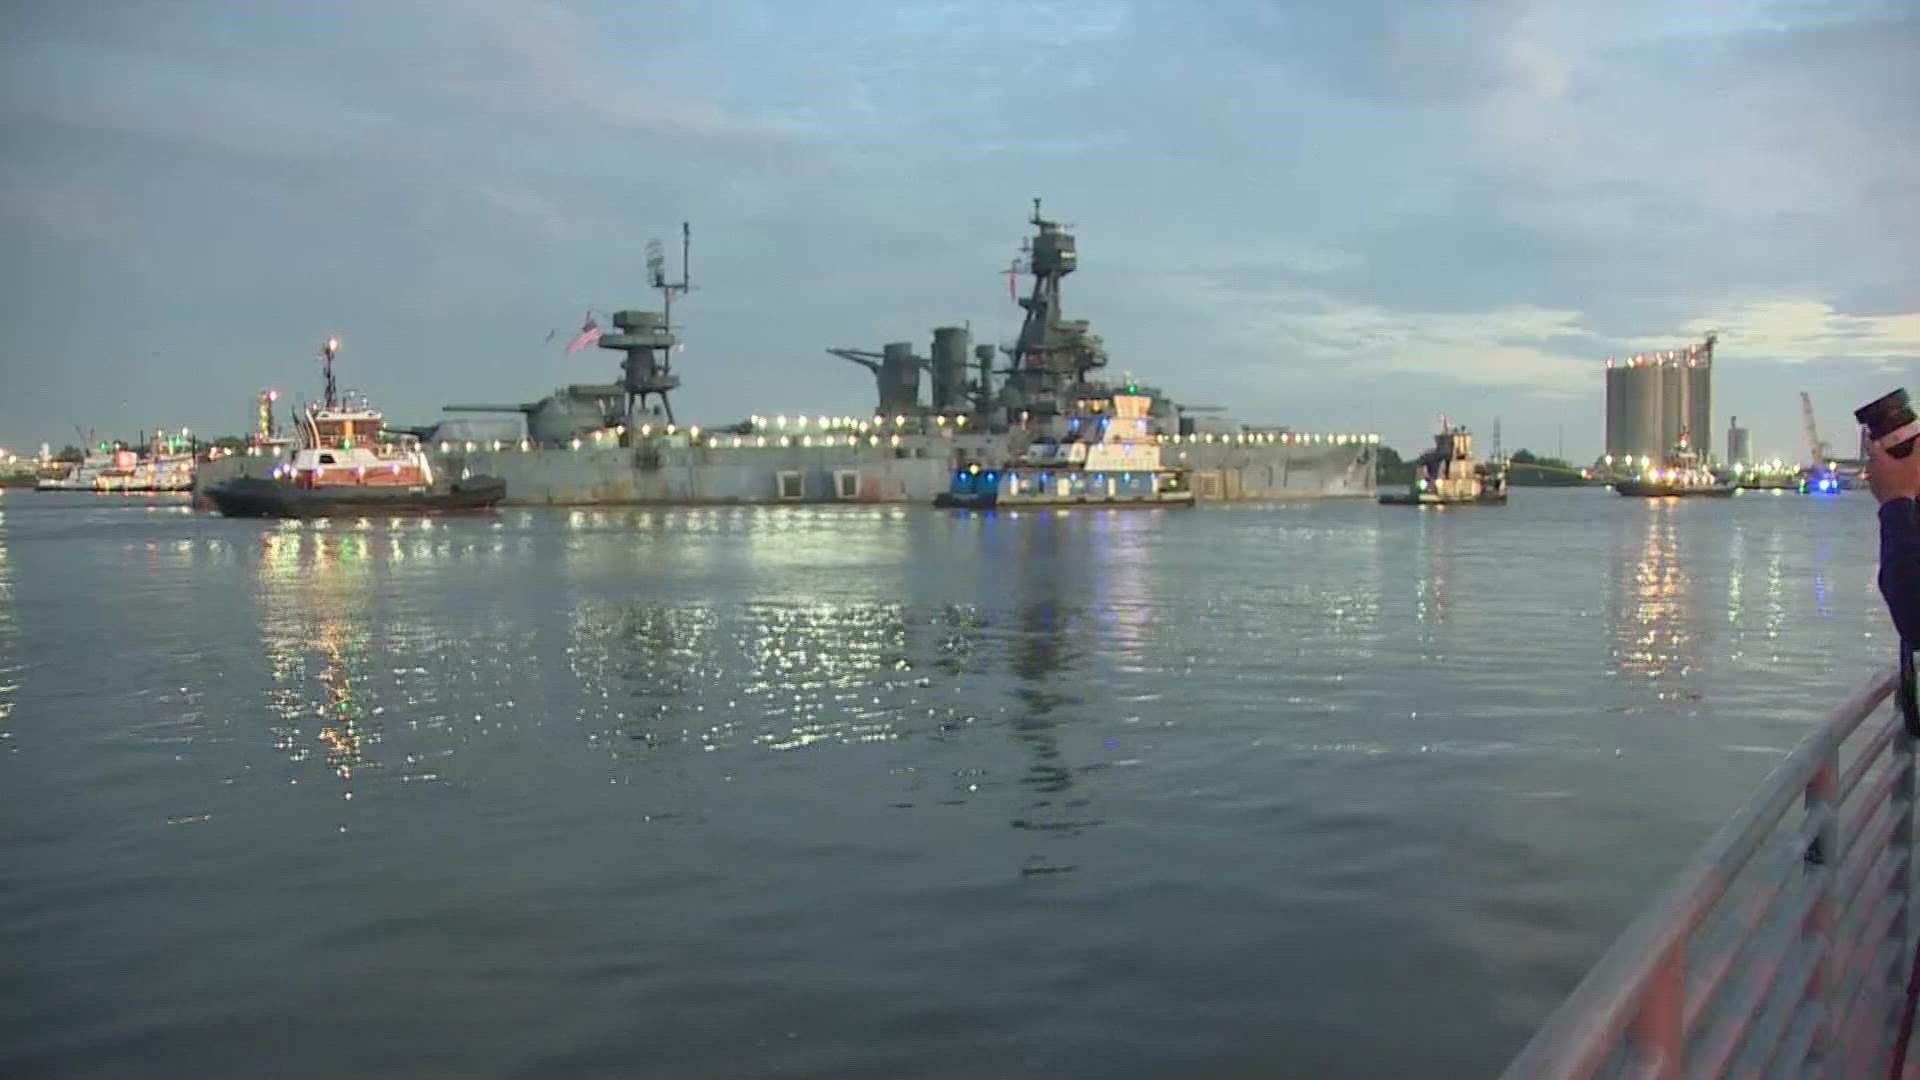 Battleship Texas will spend at least the next year in Galveston undergoing $35 million repairs to its hull.